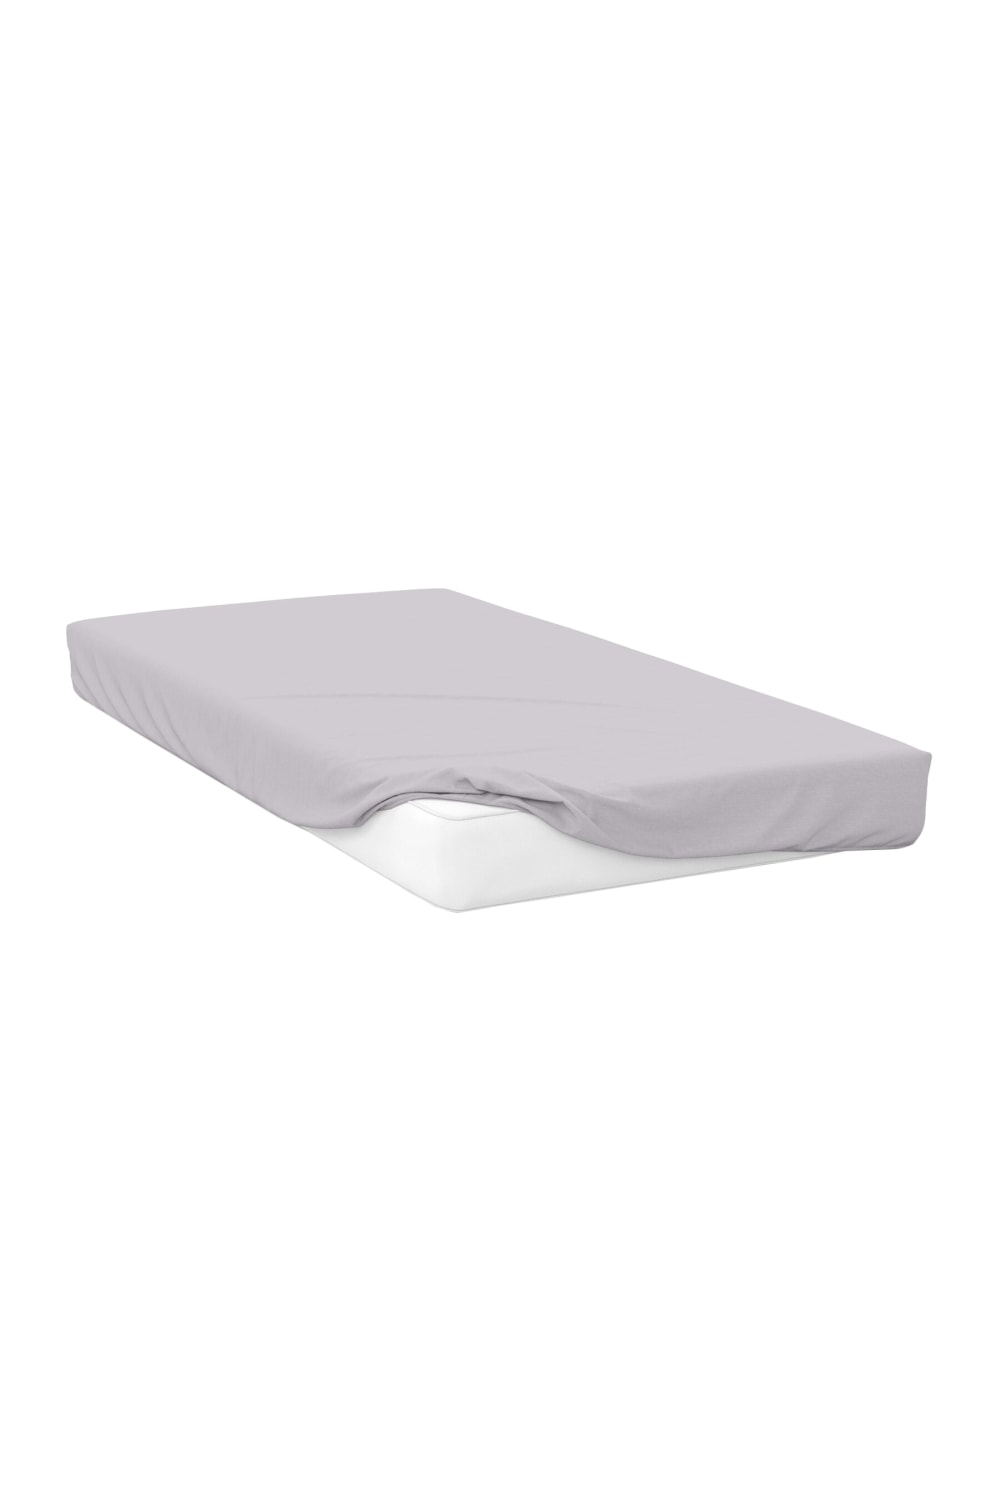 Belledorm Percale Fitted Sheet (Cloud Grey) (Twin) (UK - Single)